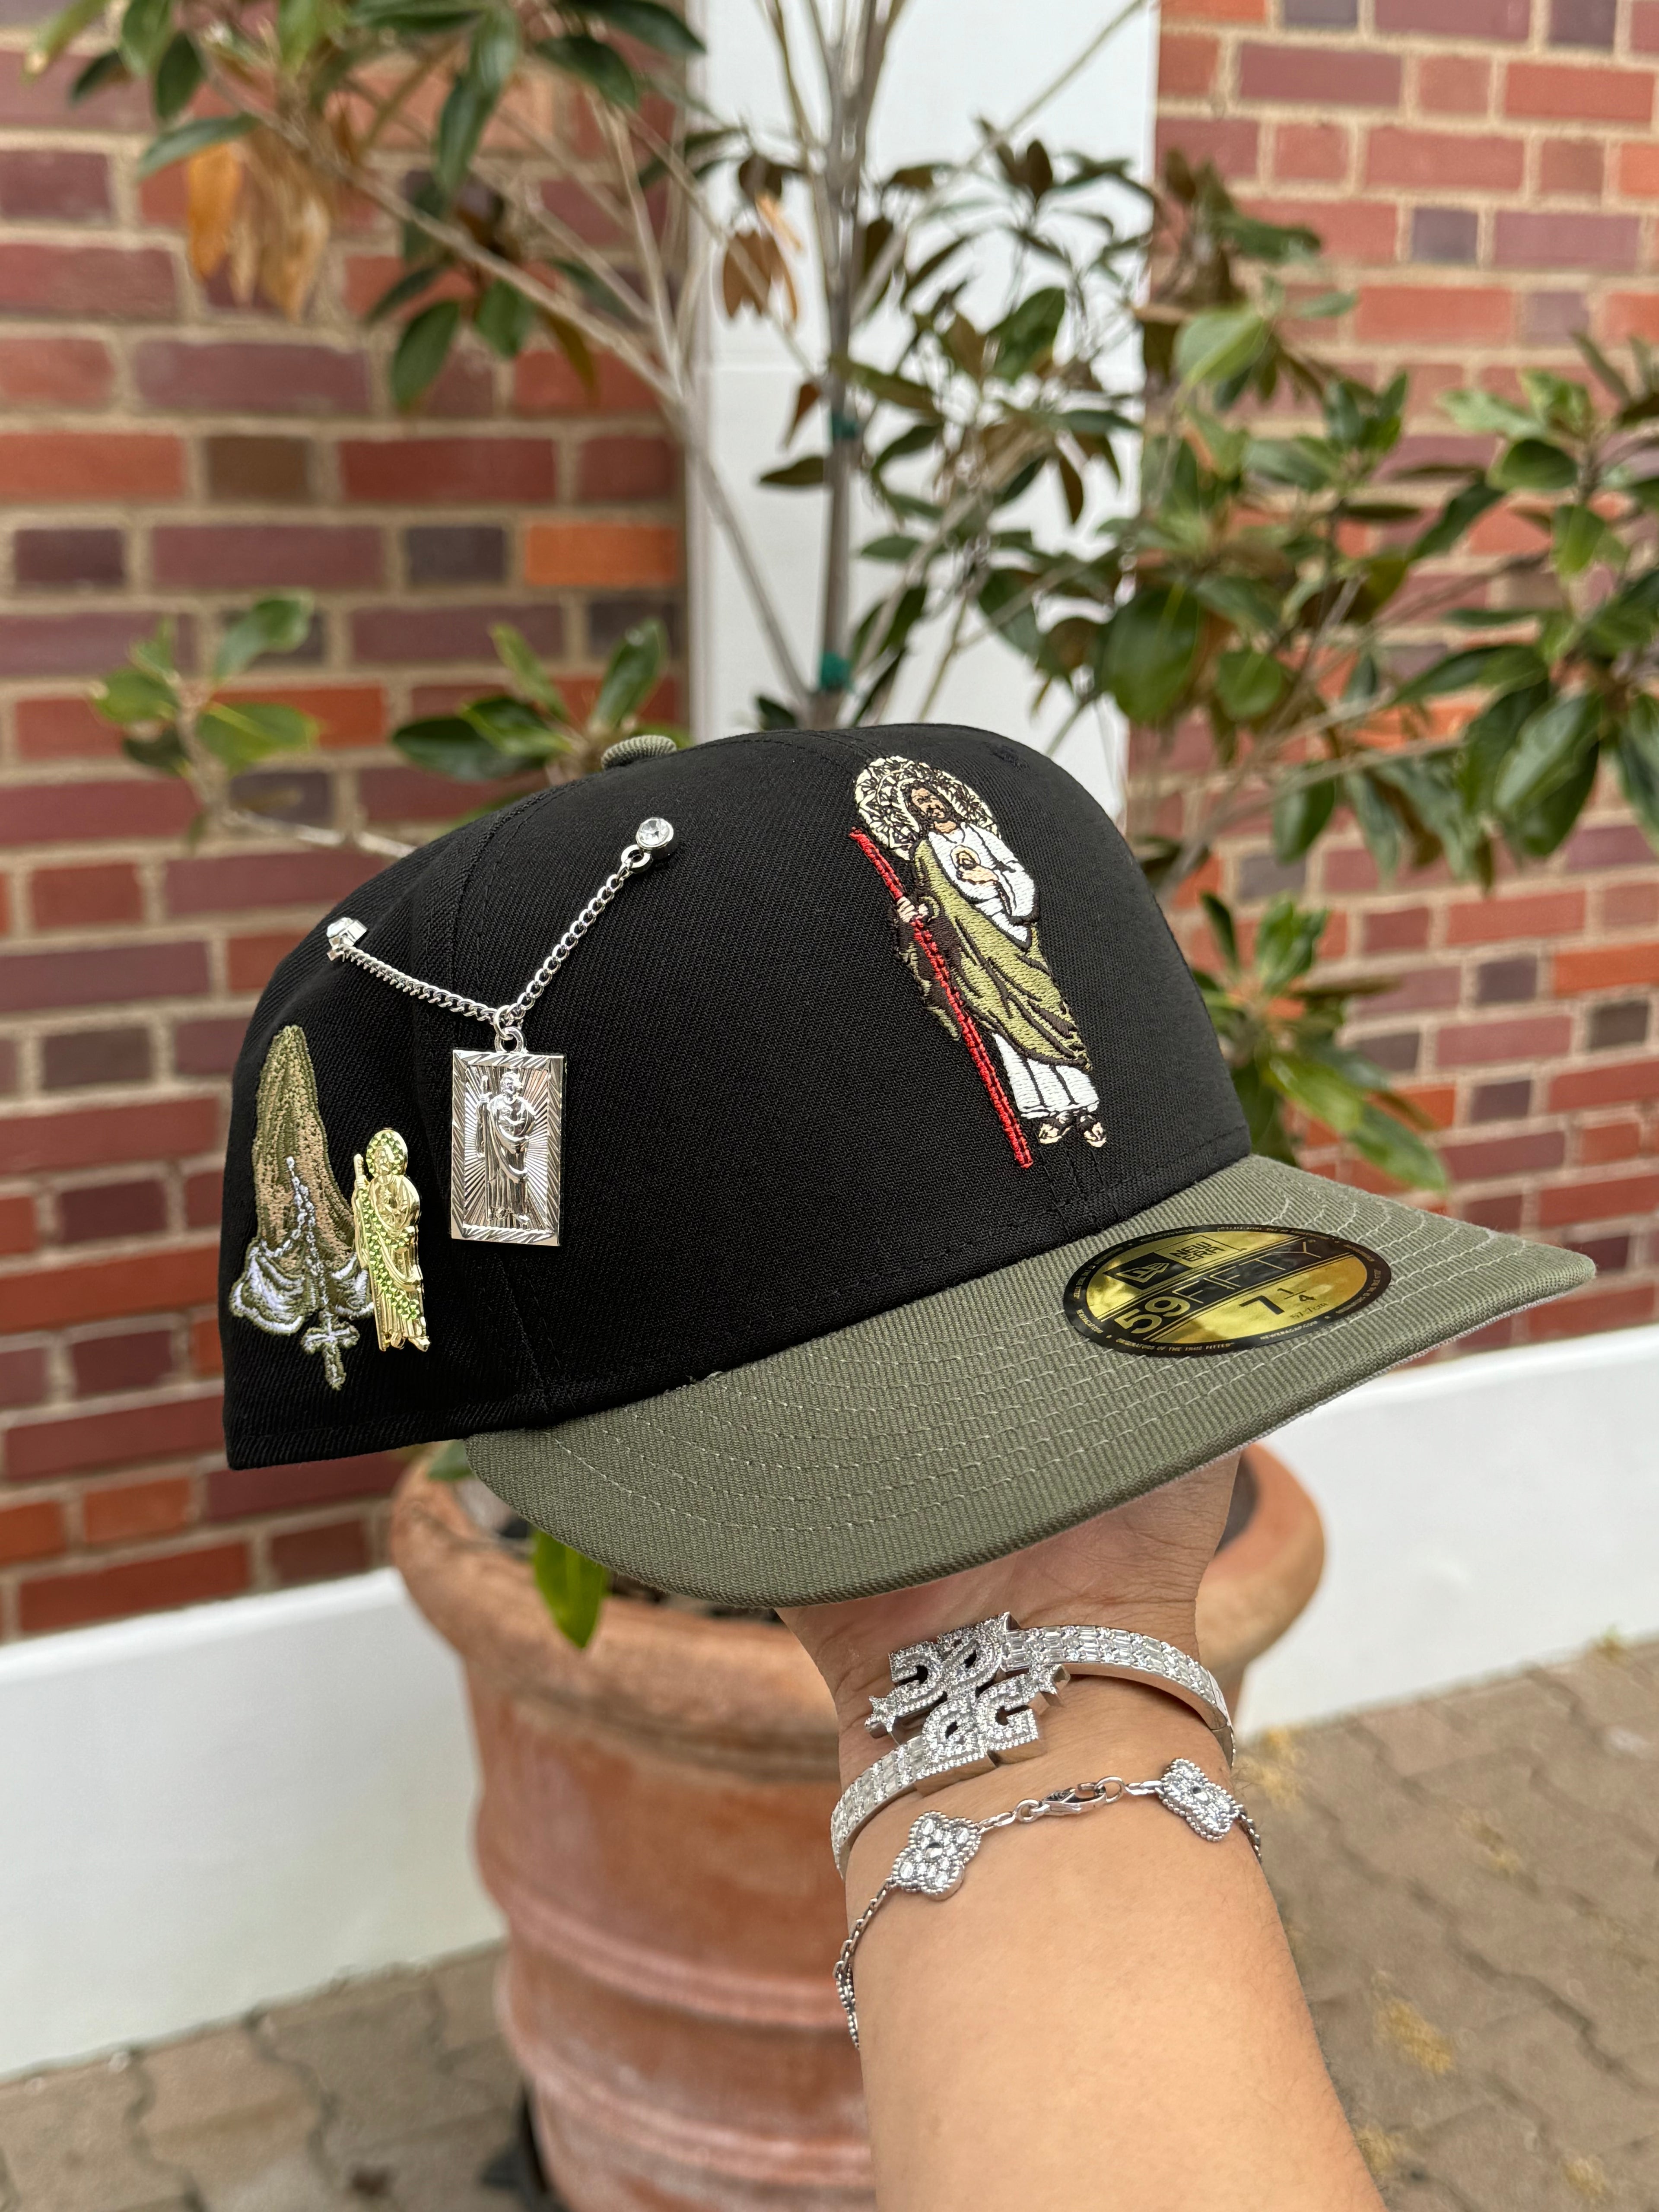 NEW ERA EXCLUSIVE 59FIFTY BLACK/OLIVE "SAN JUDAS TADEO" W/ PRAYING HANDS SIDE PATCH